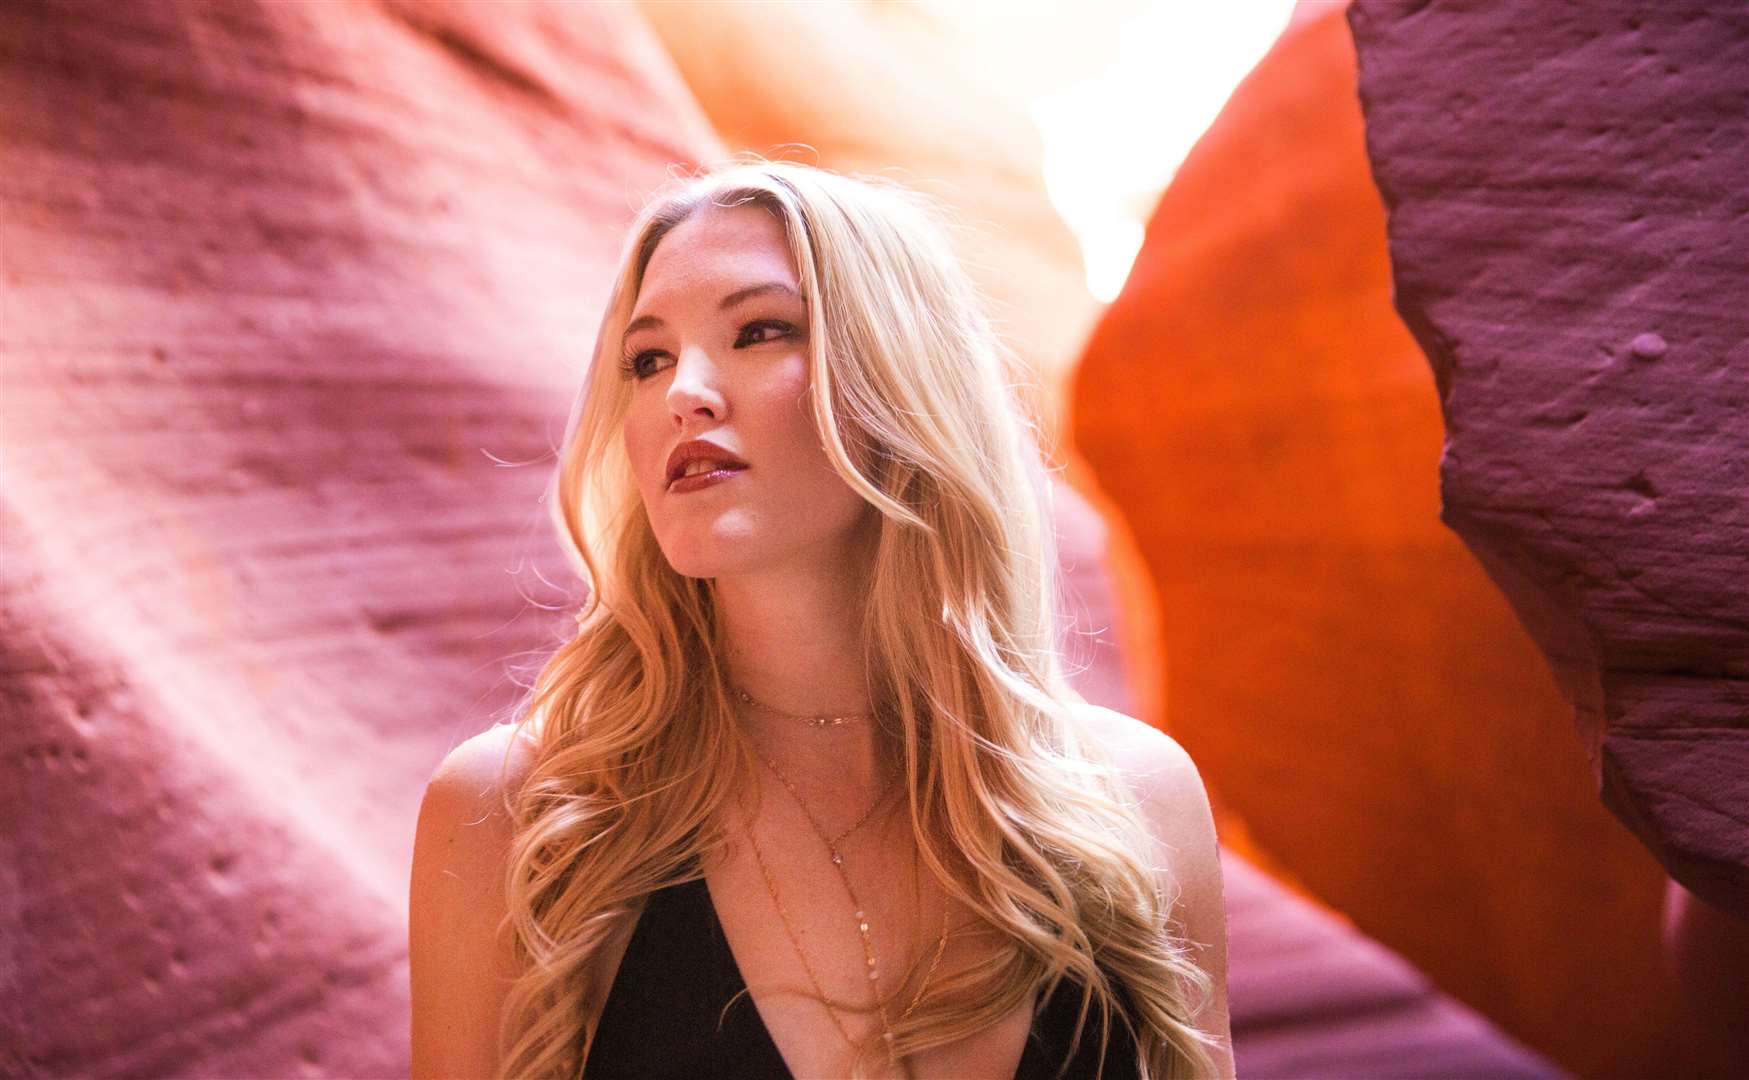 Ashley Campbell, daughter of country star Glen Campbell